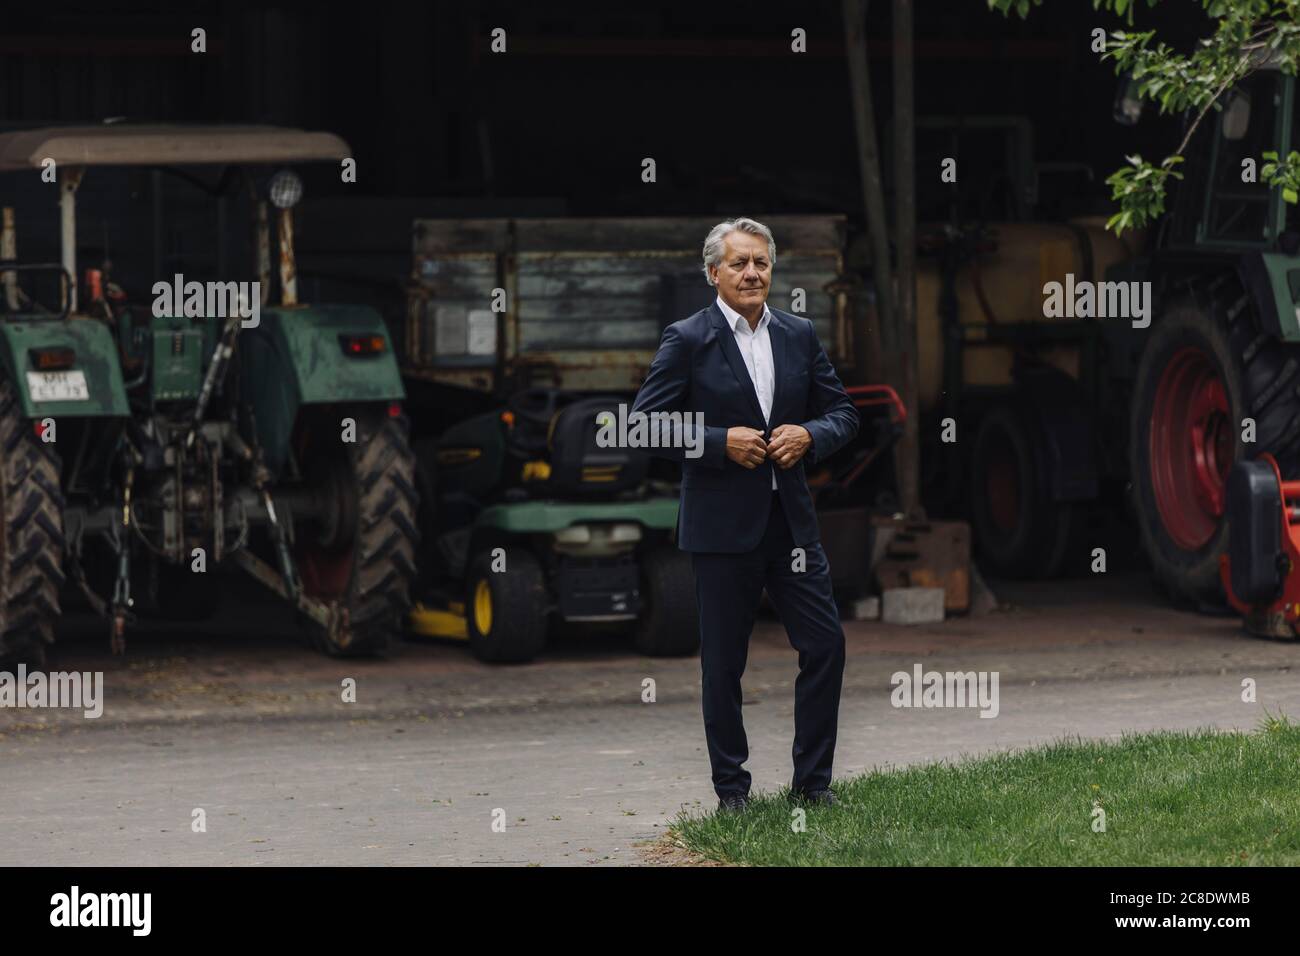 Senior businessman on a farm with tractor in barn Stock Photo